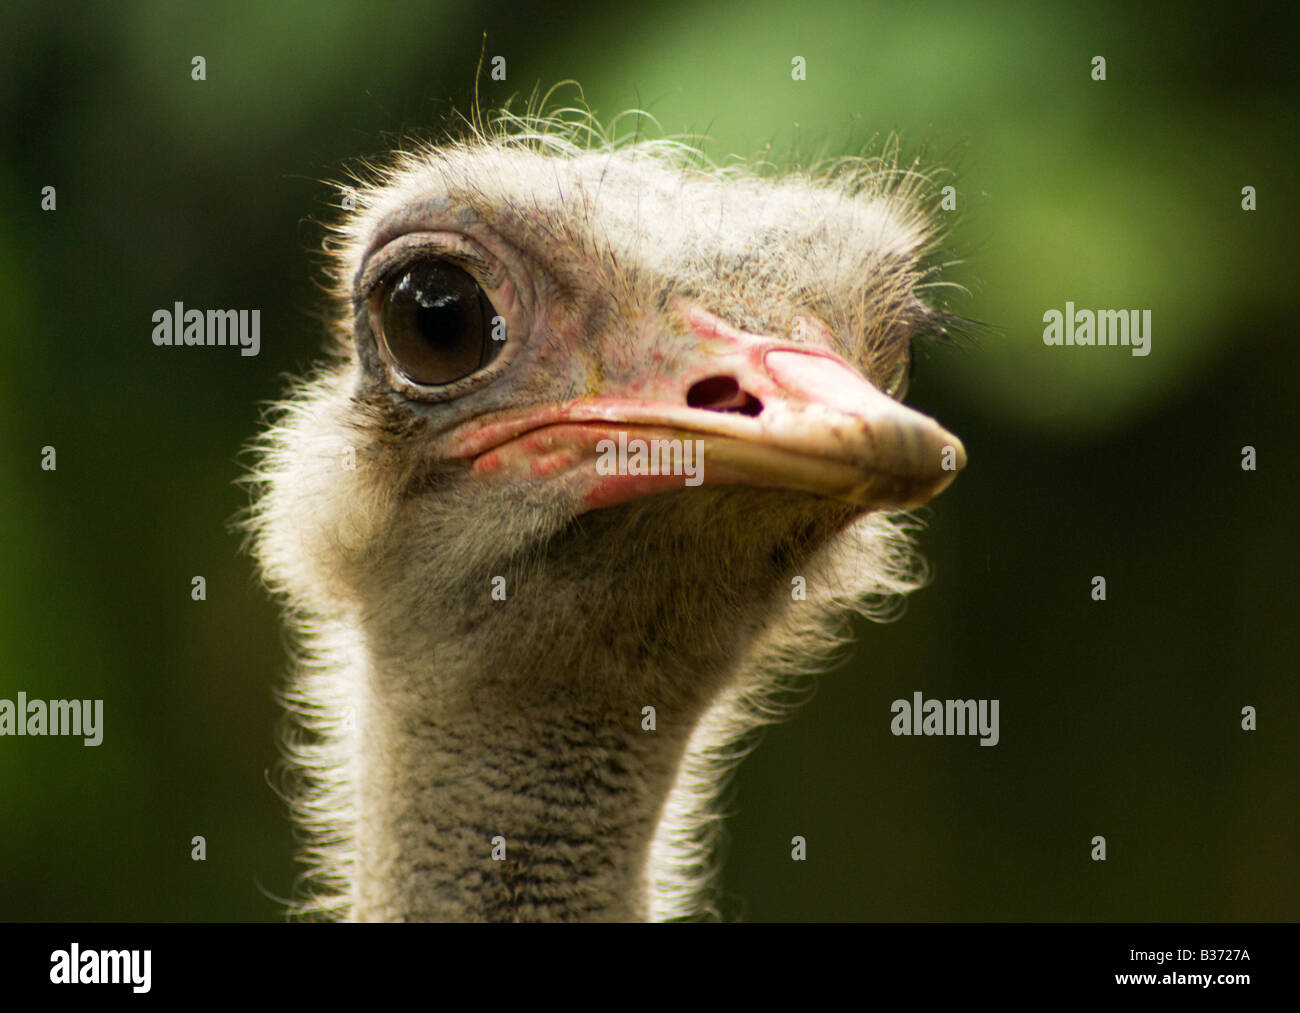 An Ostrich, Struthio Camelus, head backlit Stock Photo